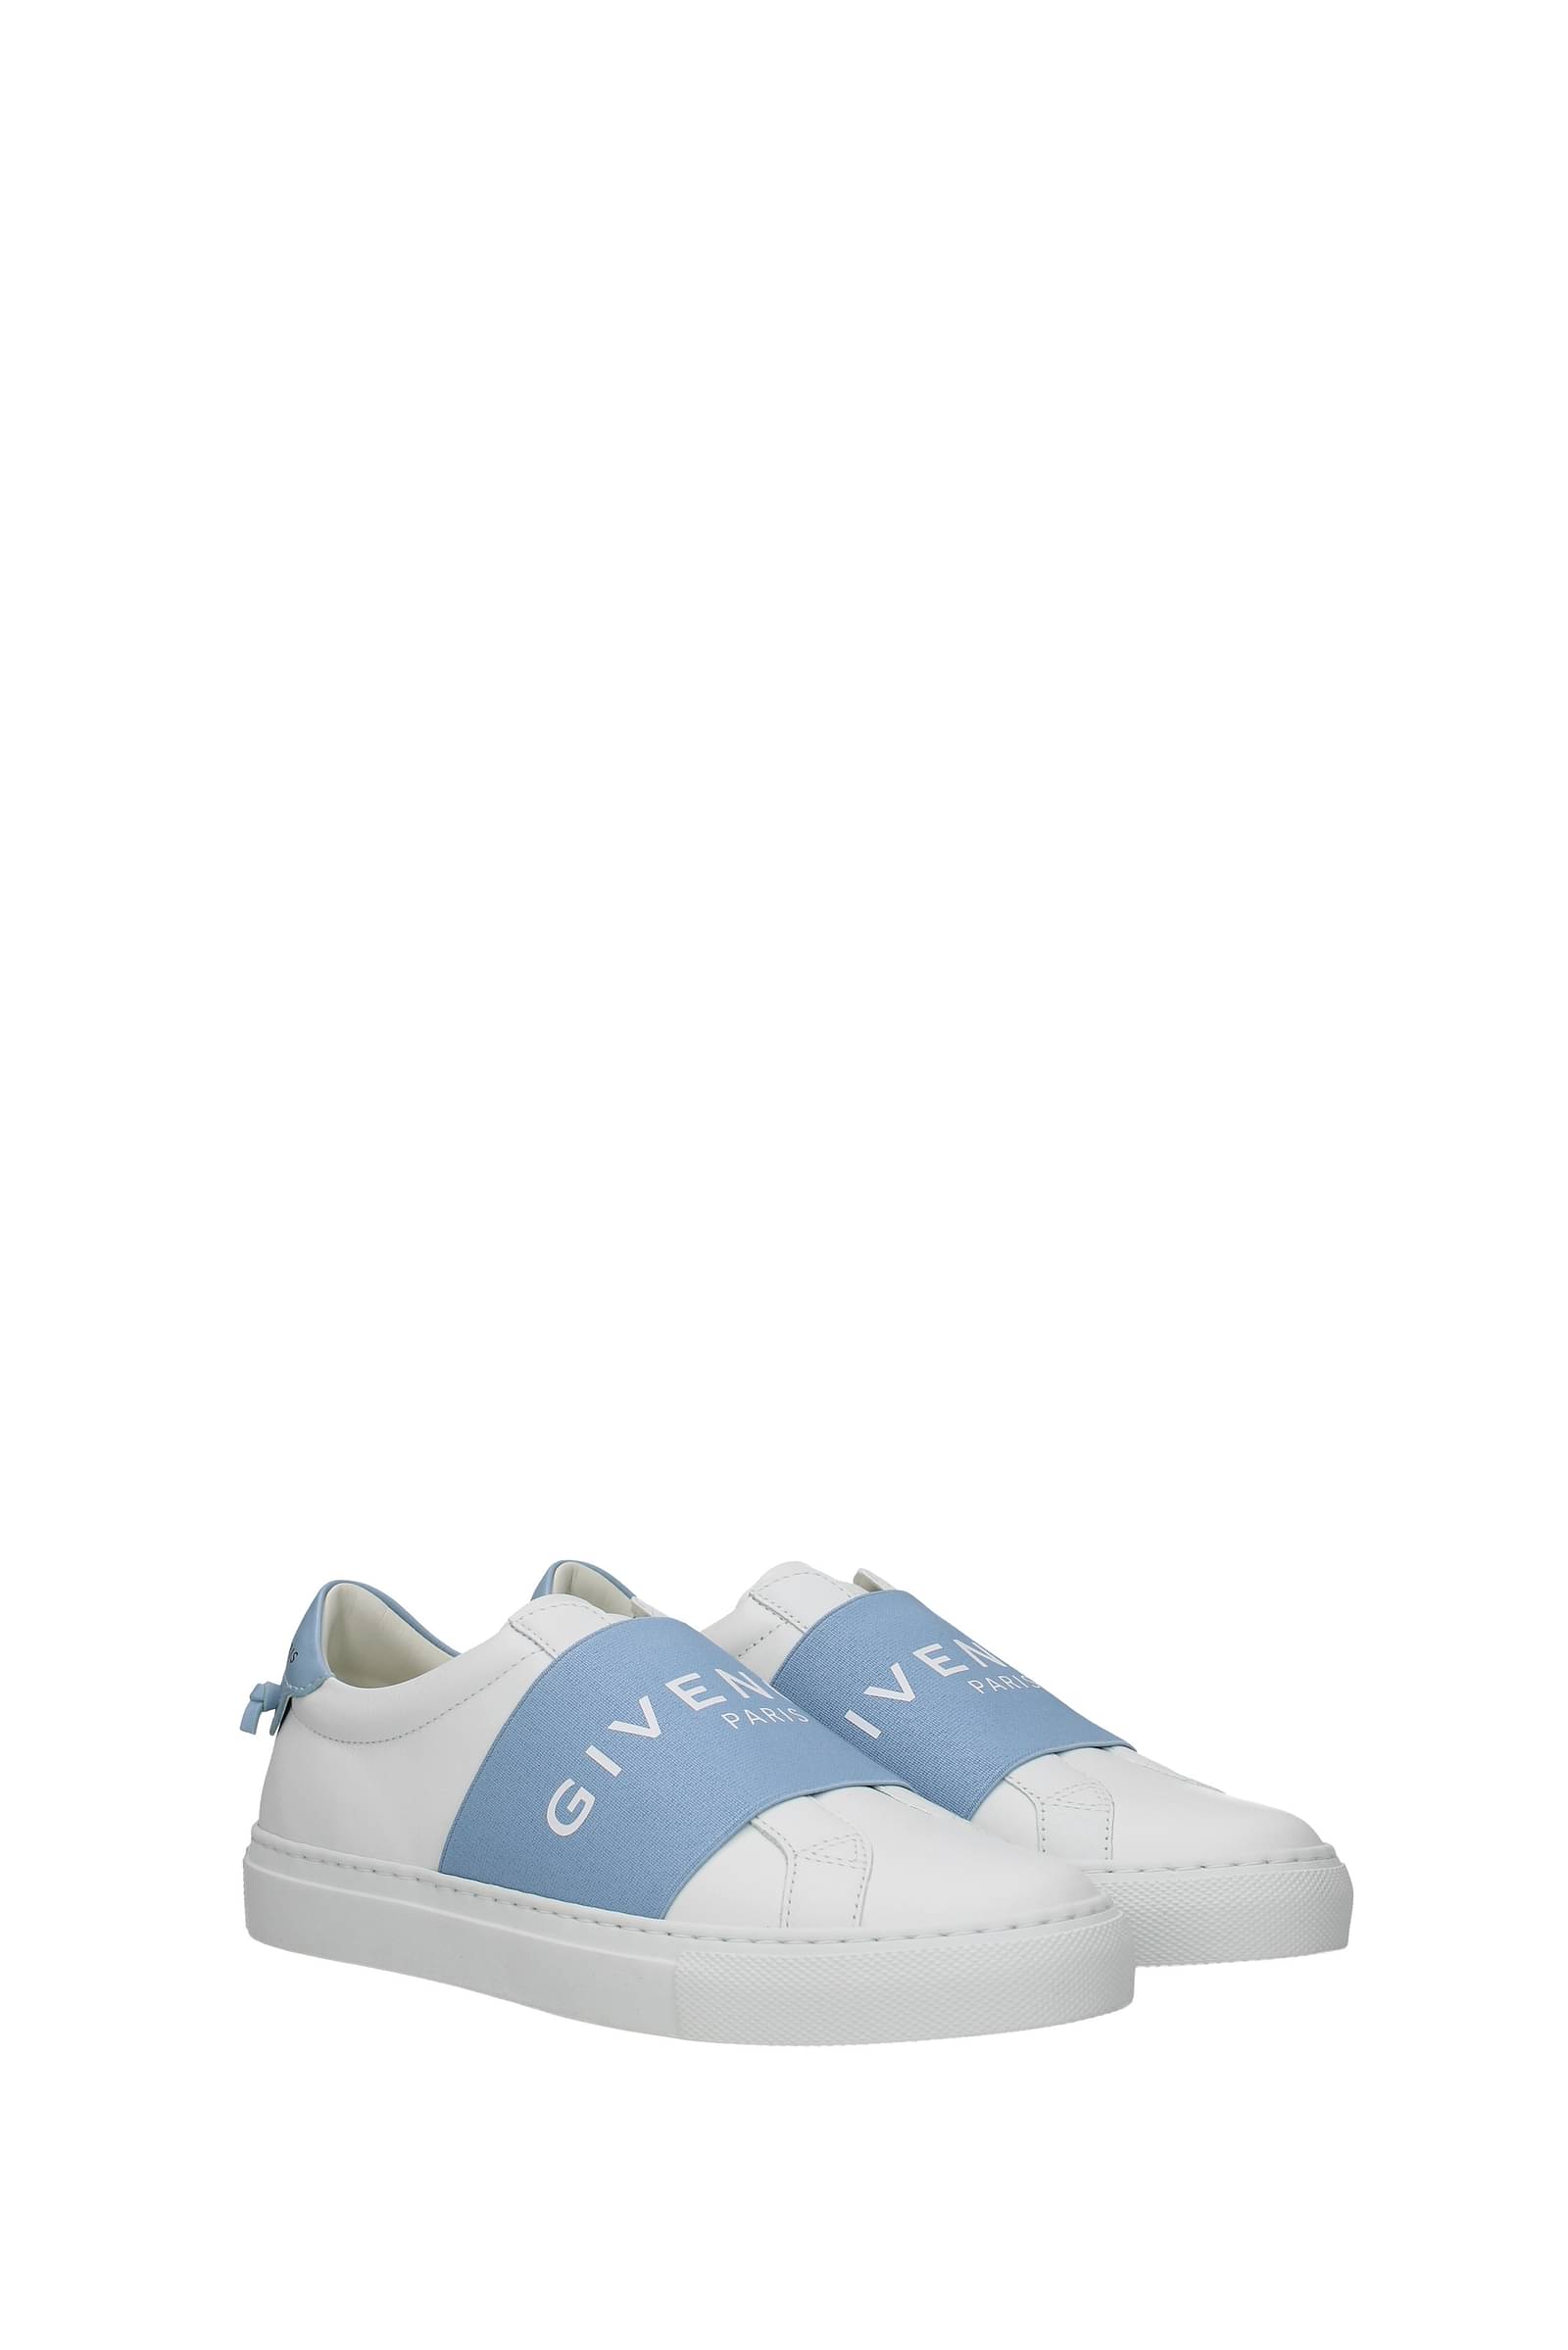 Givenchy Sneakers urban street Women BE0005E0EB194 Fabric 380€